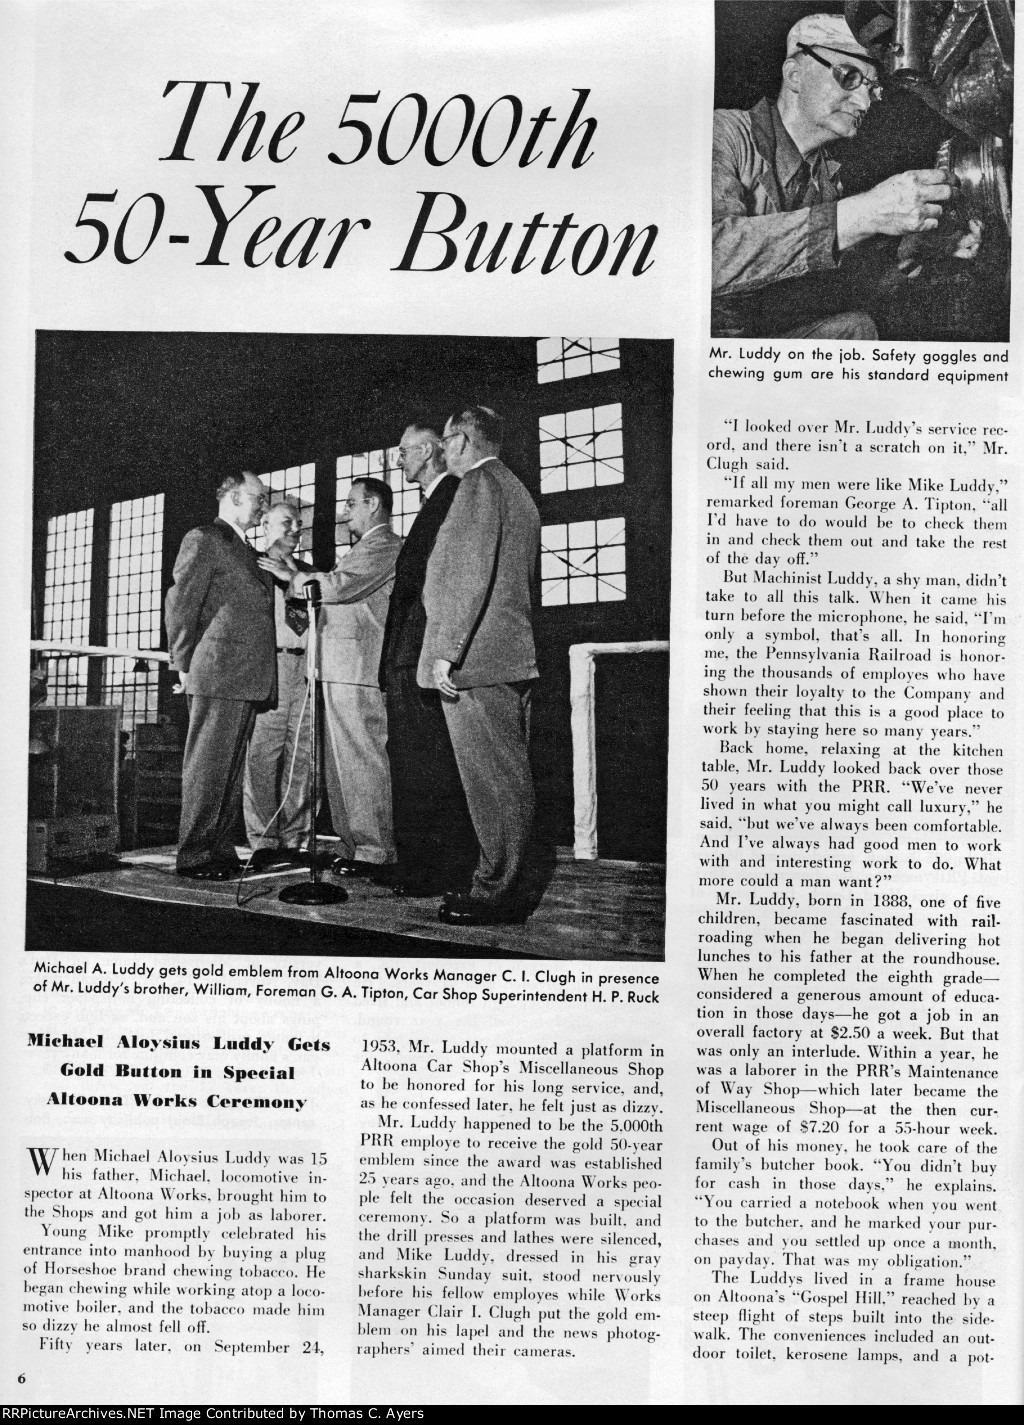 "5000th 50-Year Button," Page 6, 1953